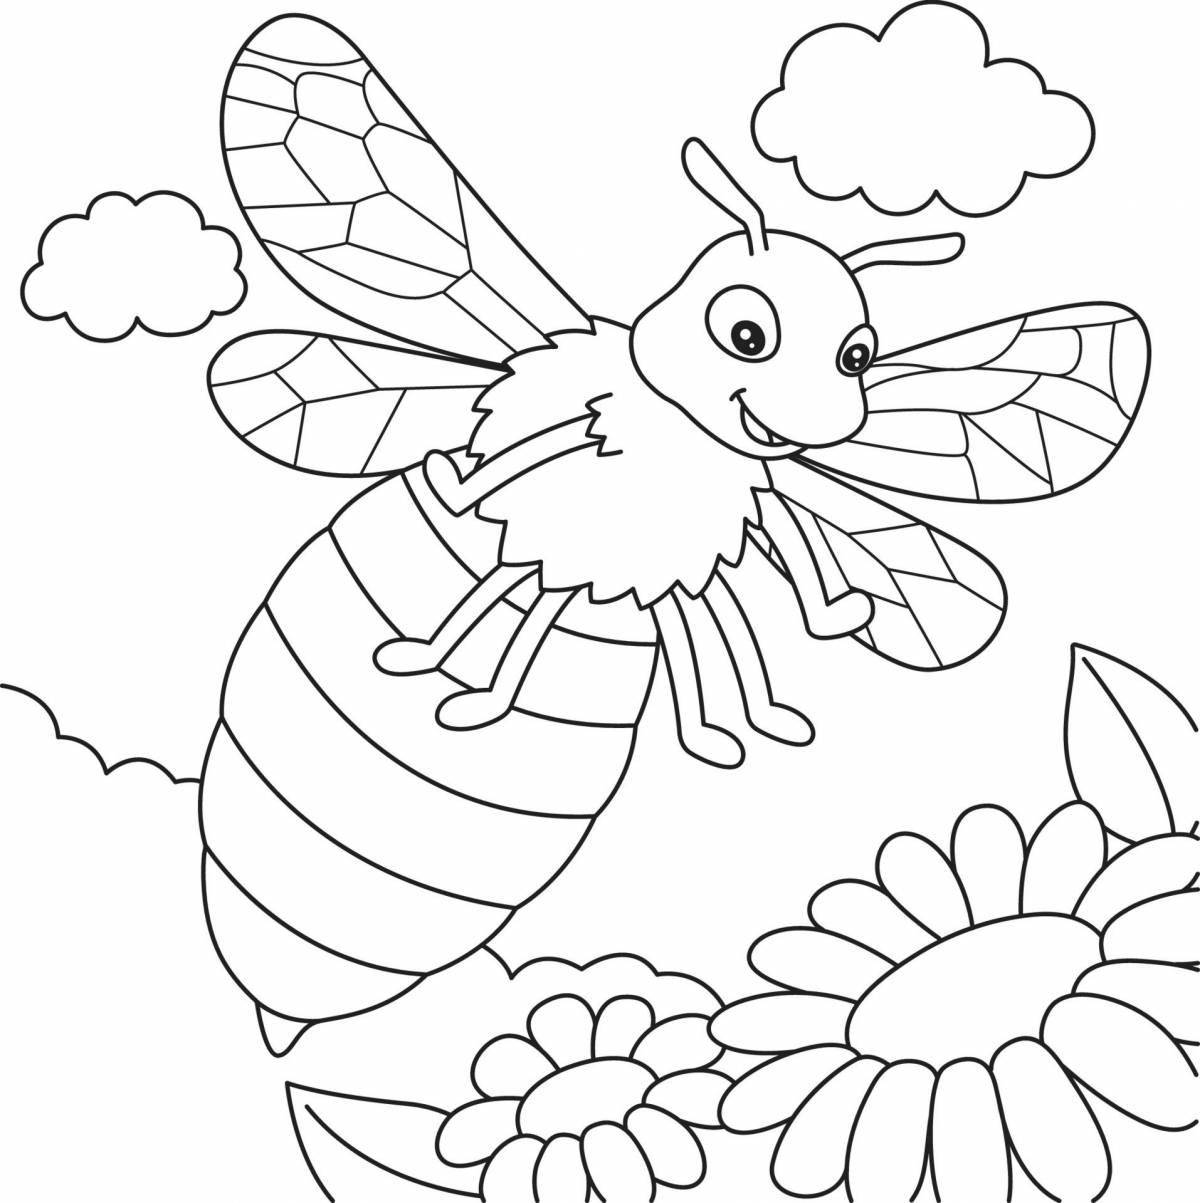 Fat bee coloring book for children 6-7 years old